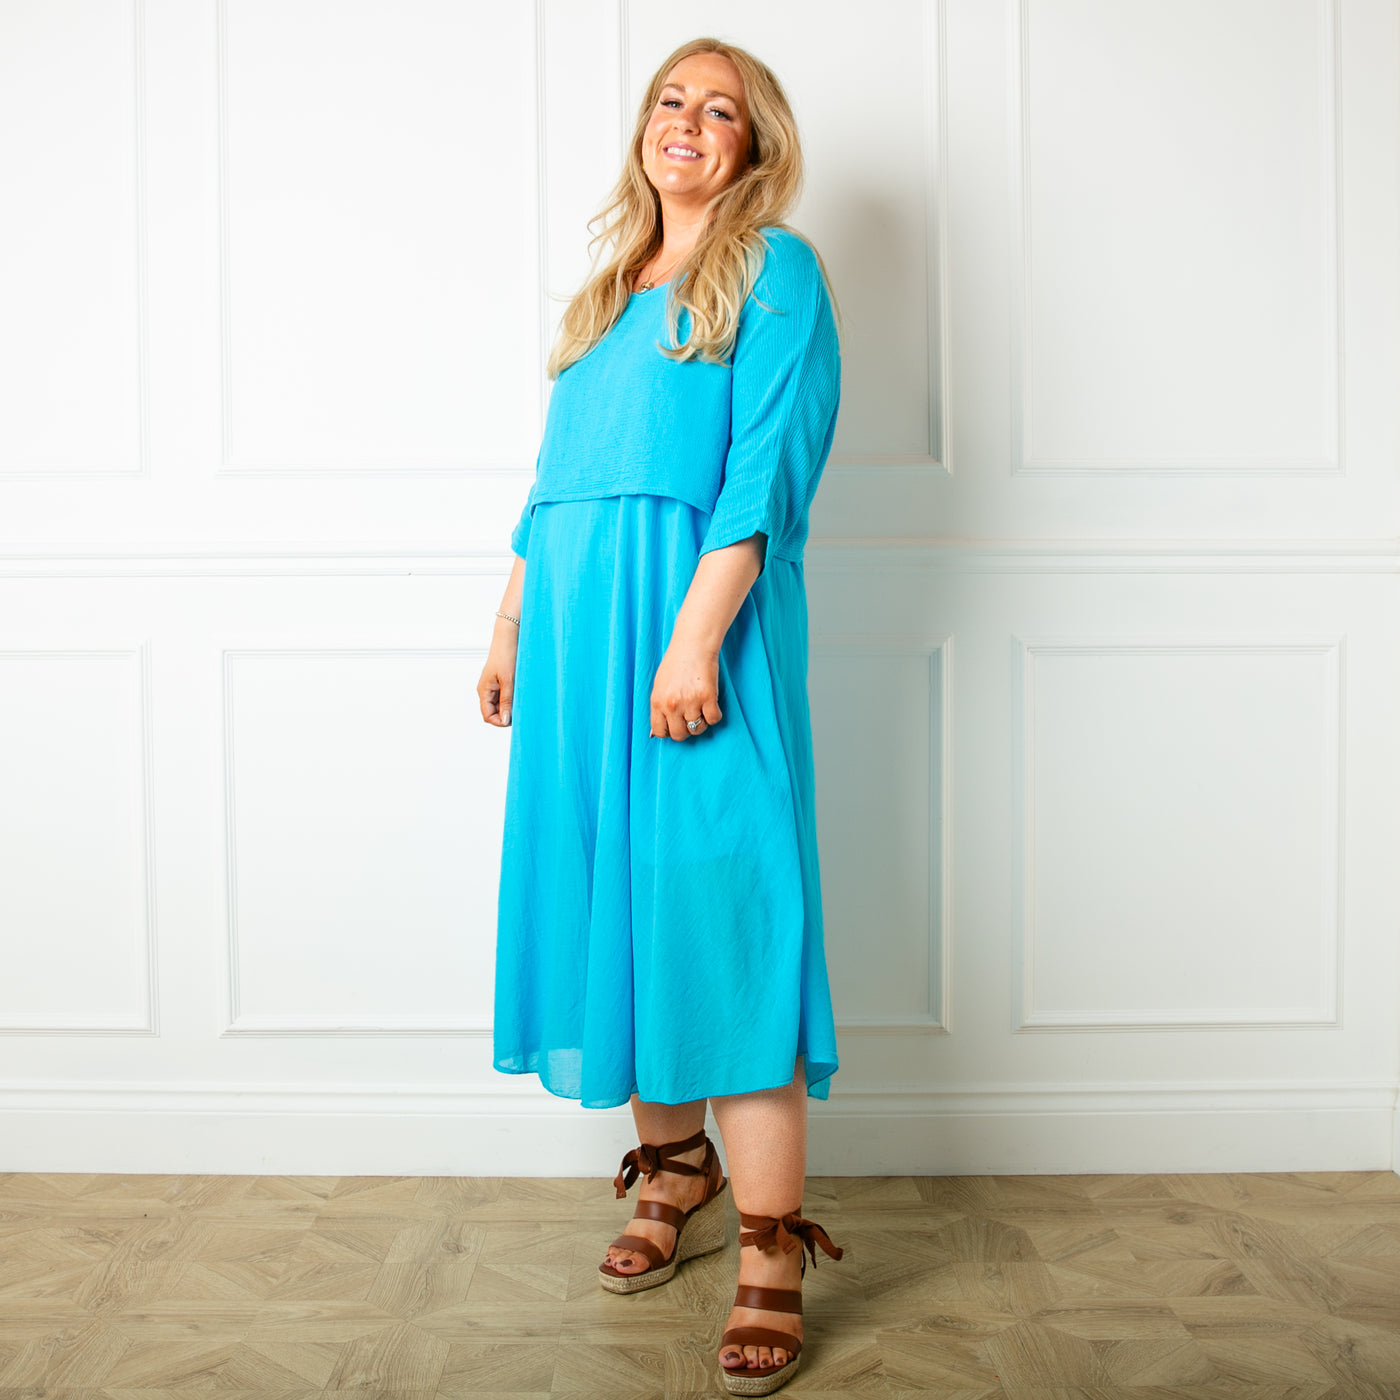 The aqua blue Two Piece Dress with a midi dress that has straps, a round neckline and a lining underneath